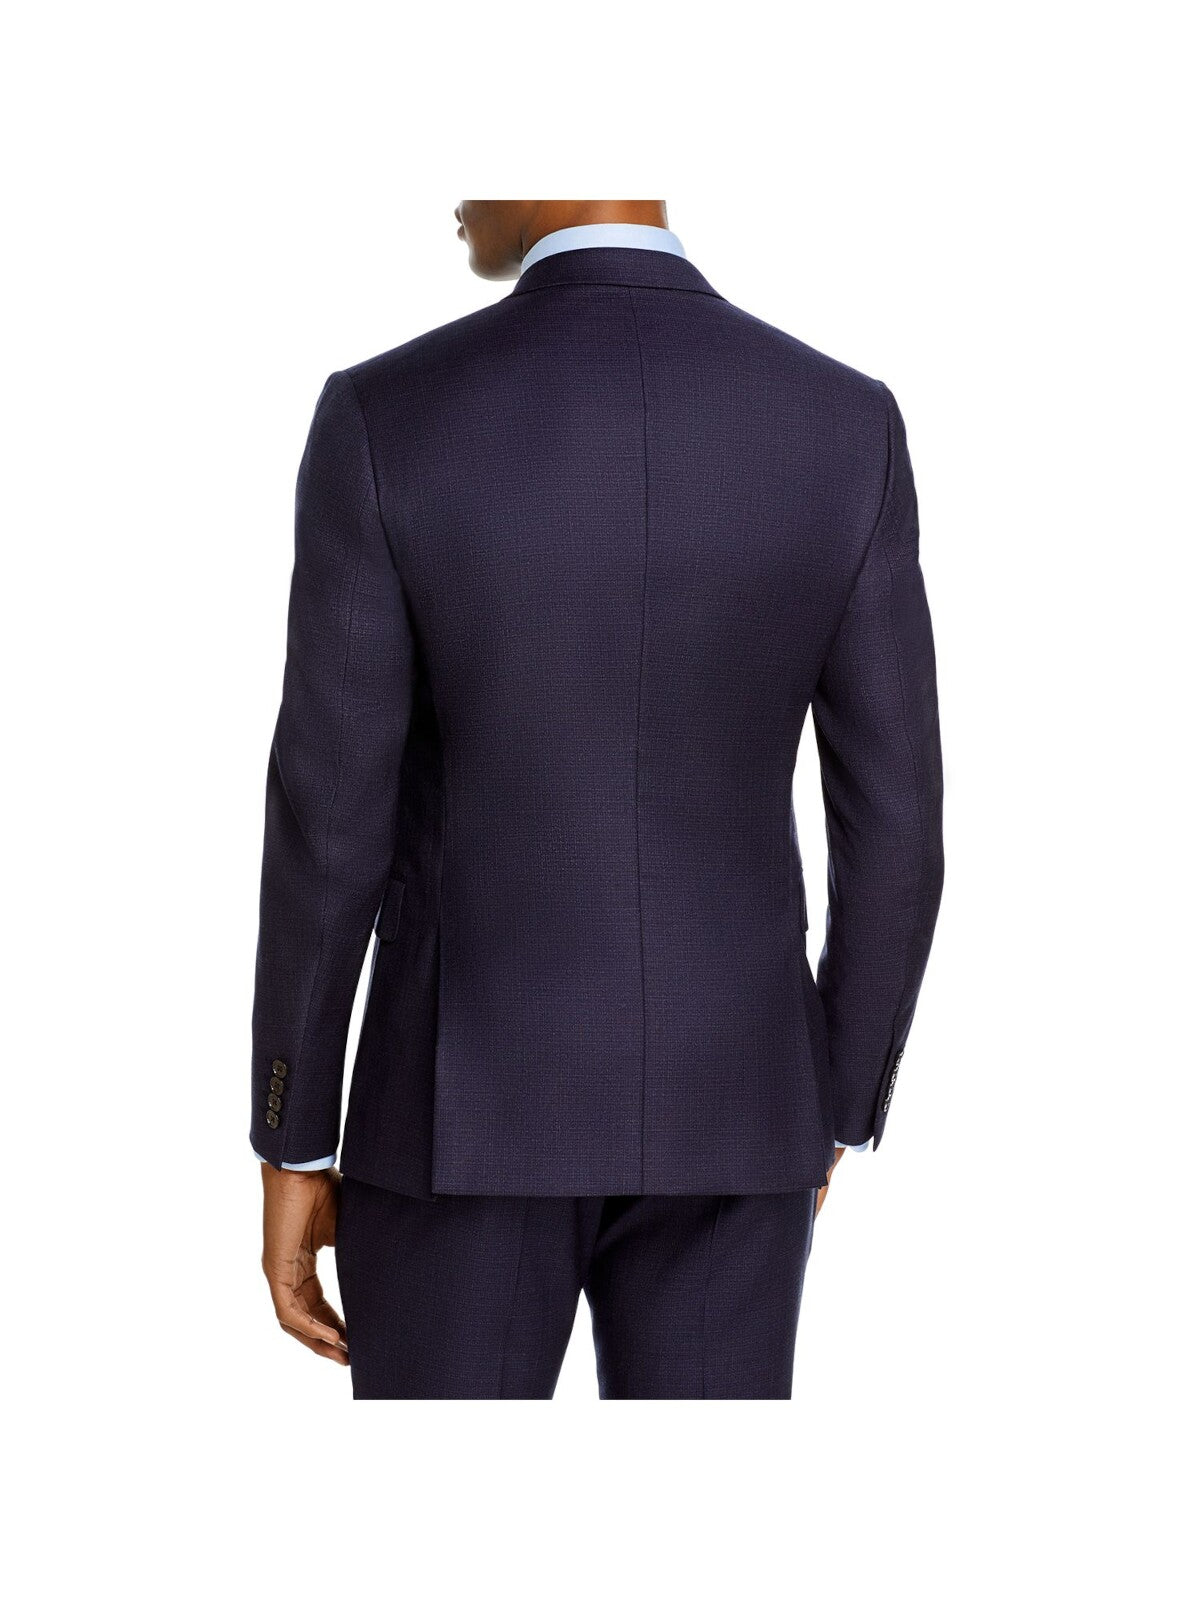 THEORY Mens Bowery Navy Single Breasted, Extra Slim Fit Wool Blend Suit Separate Blazer Jacket 42R